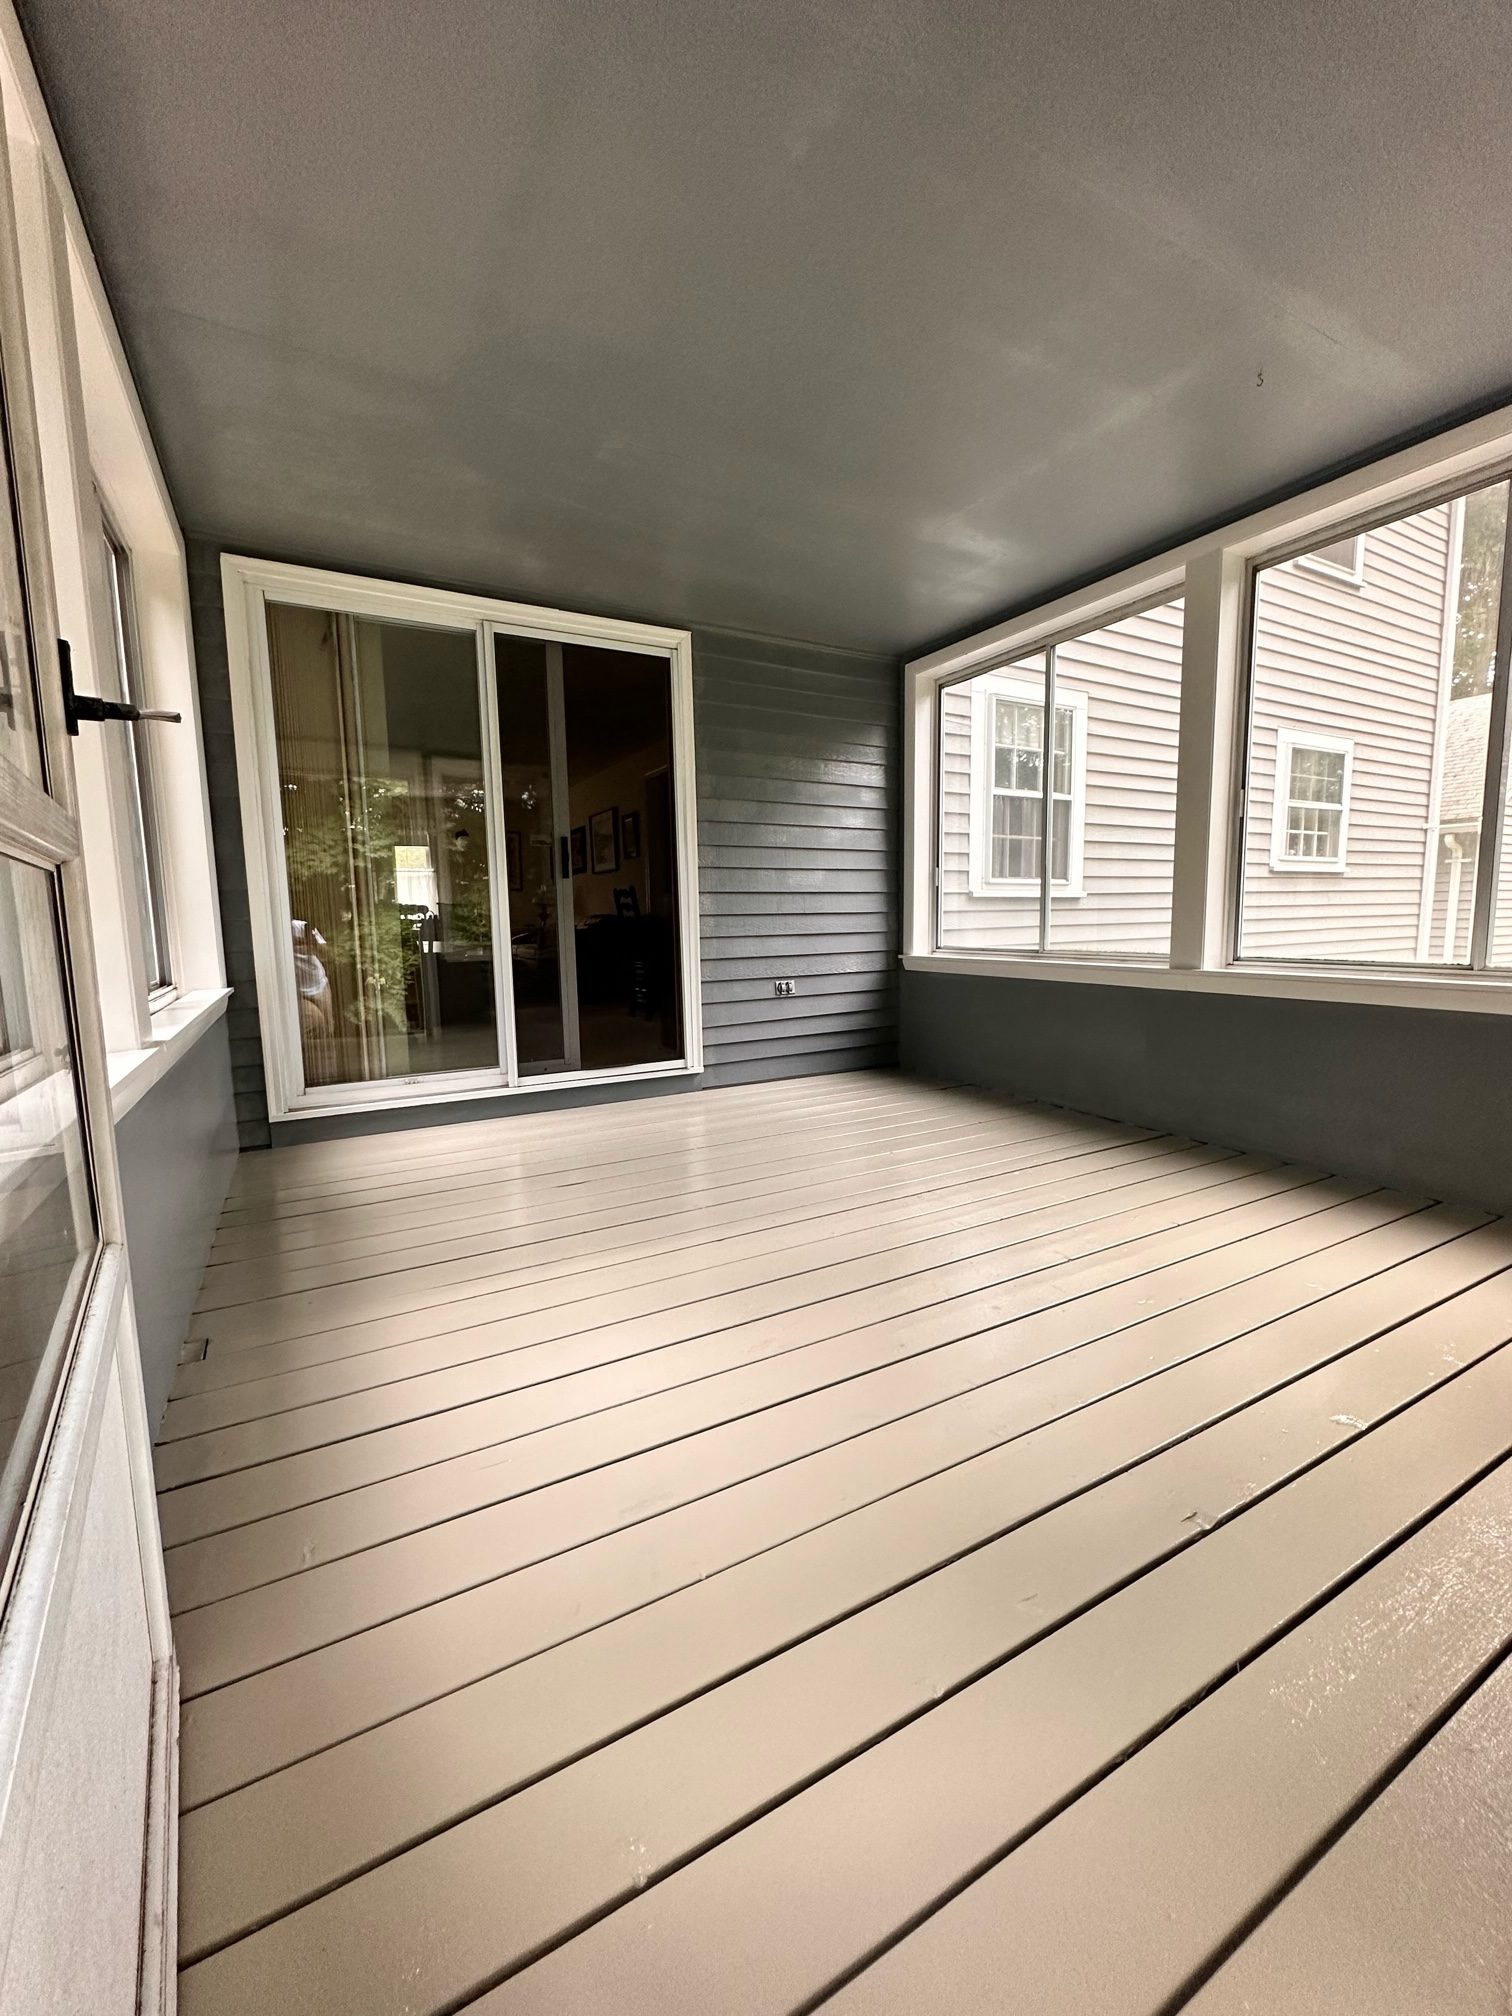 Porch Painting & Staining in Lexington, MA After